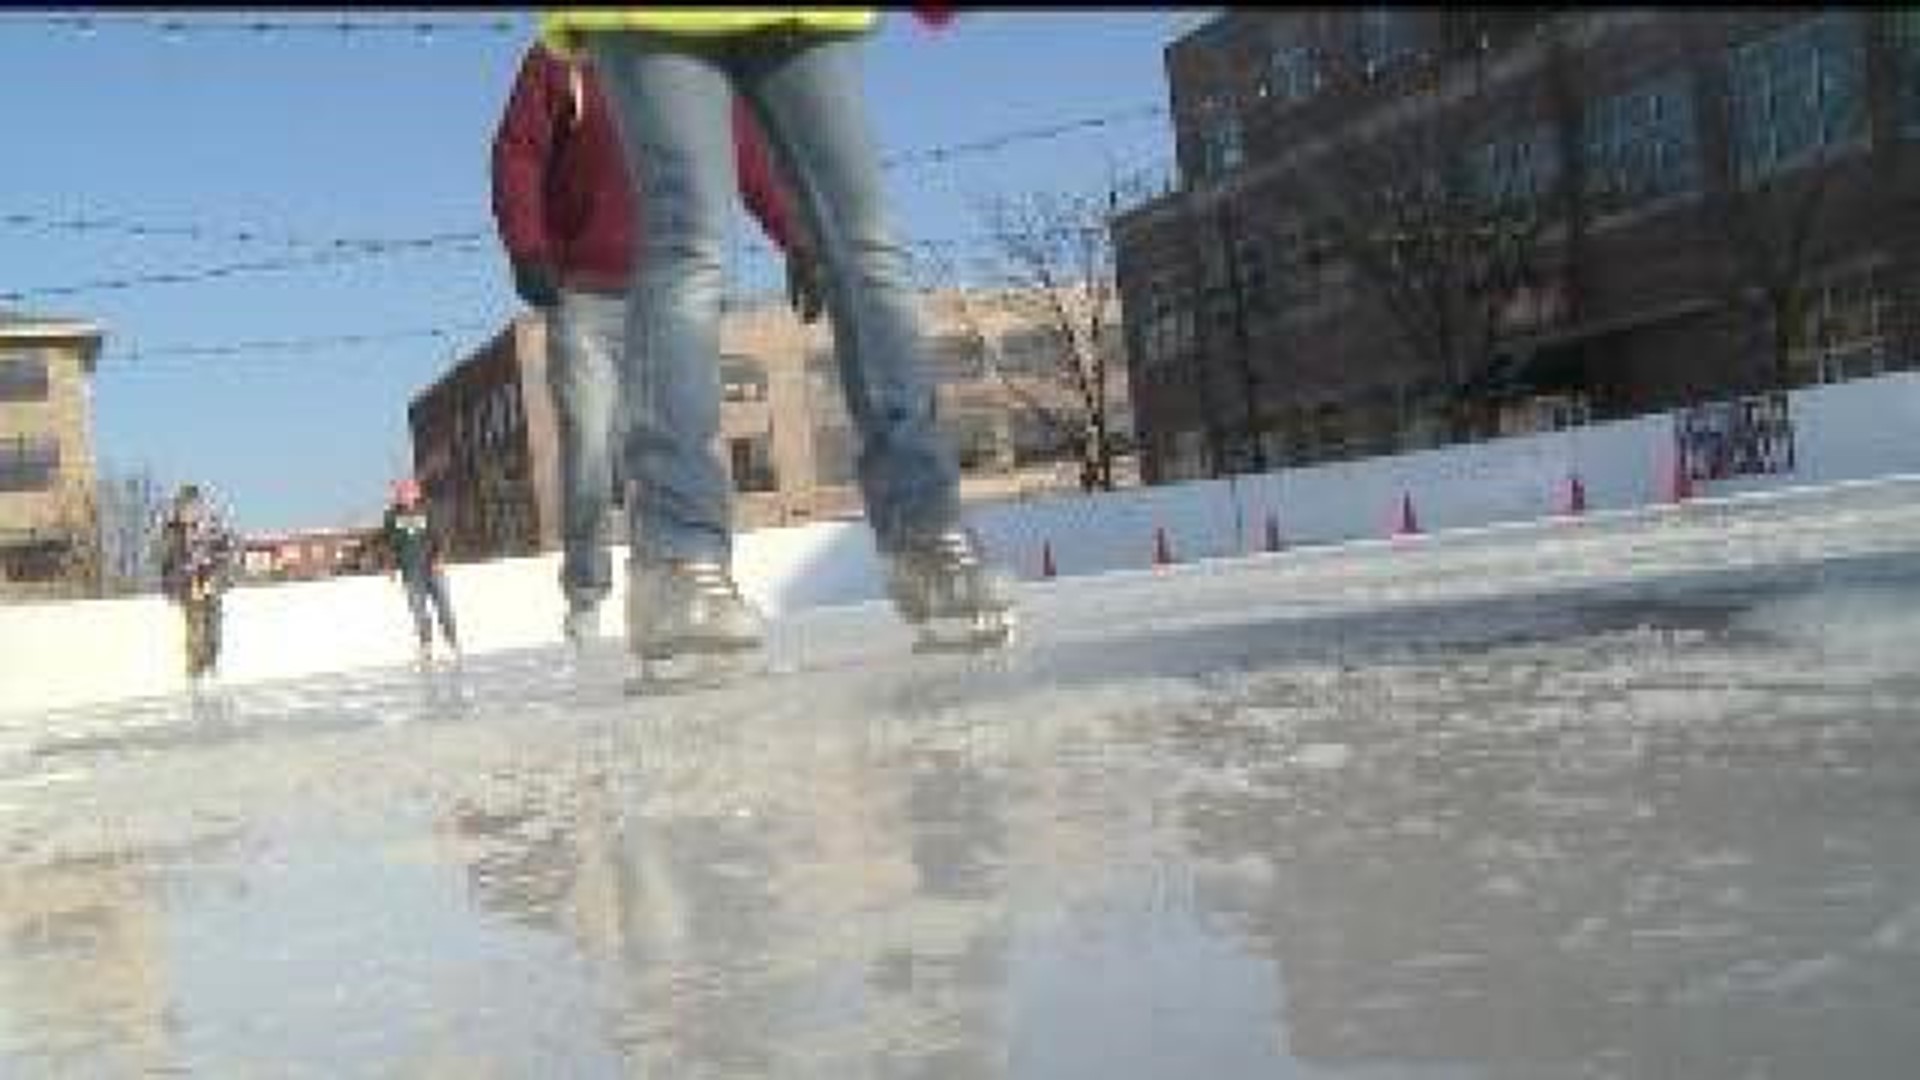 Center Ice opens in Moline